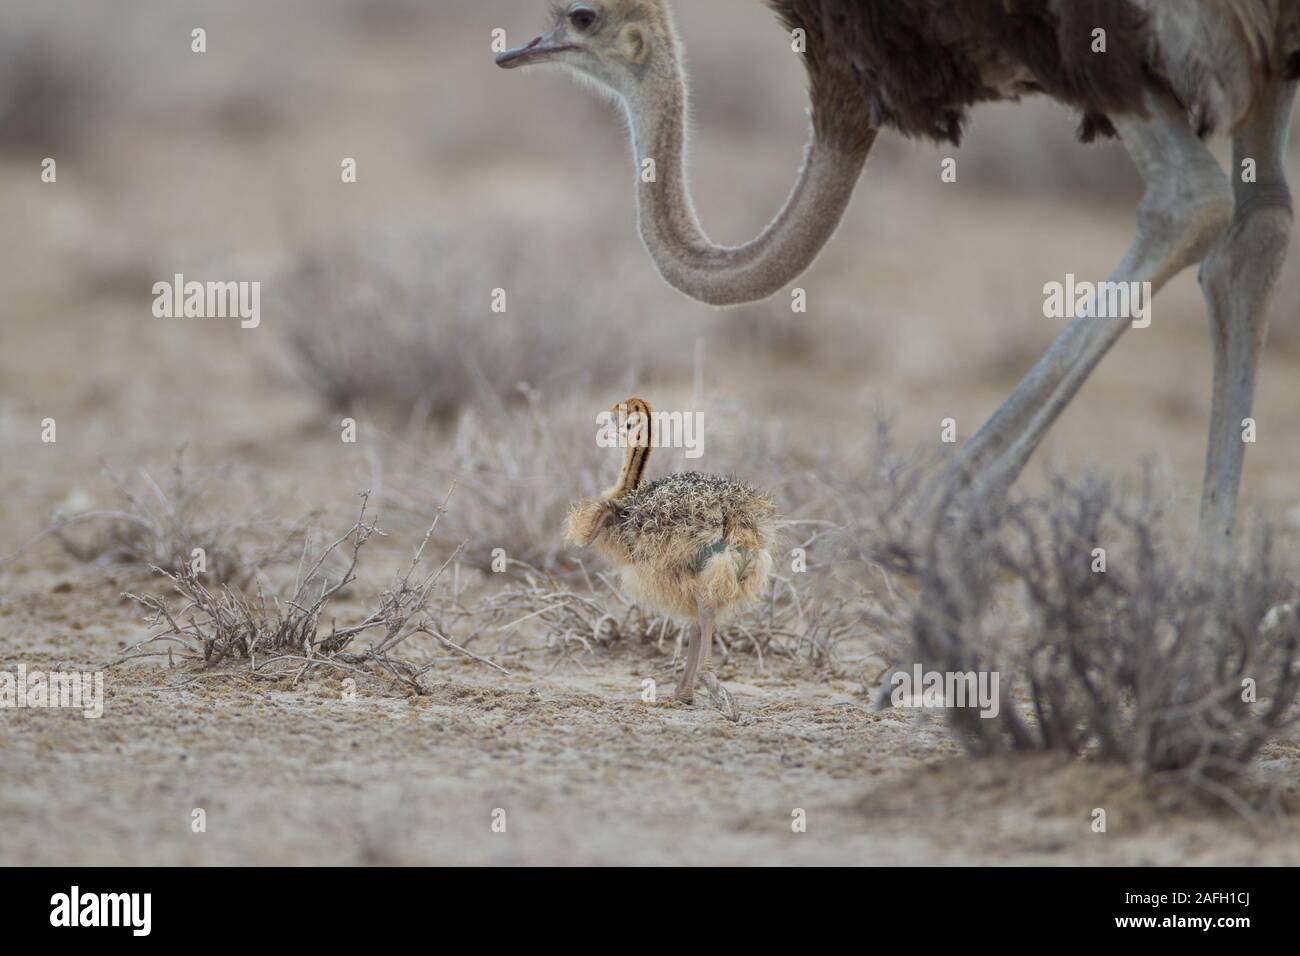 Selective focus shot of a baby ostrich walking near its mother Stock Photo